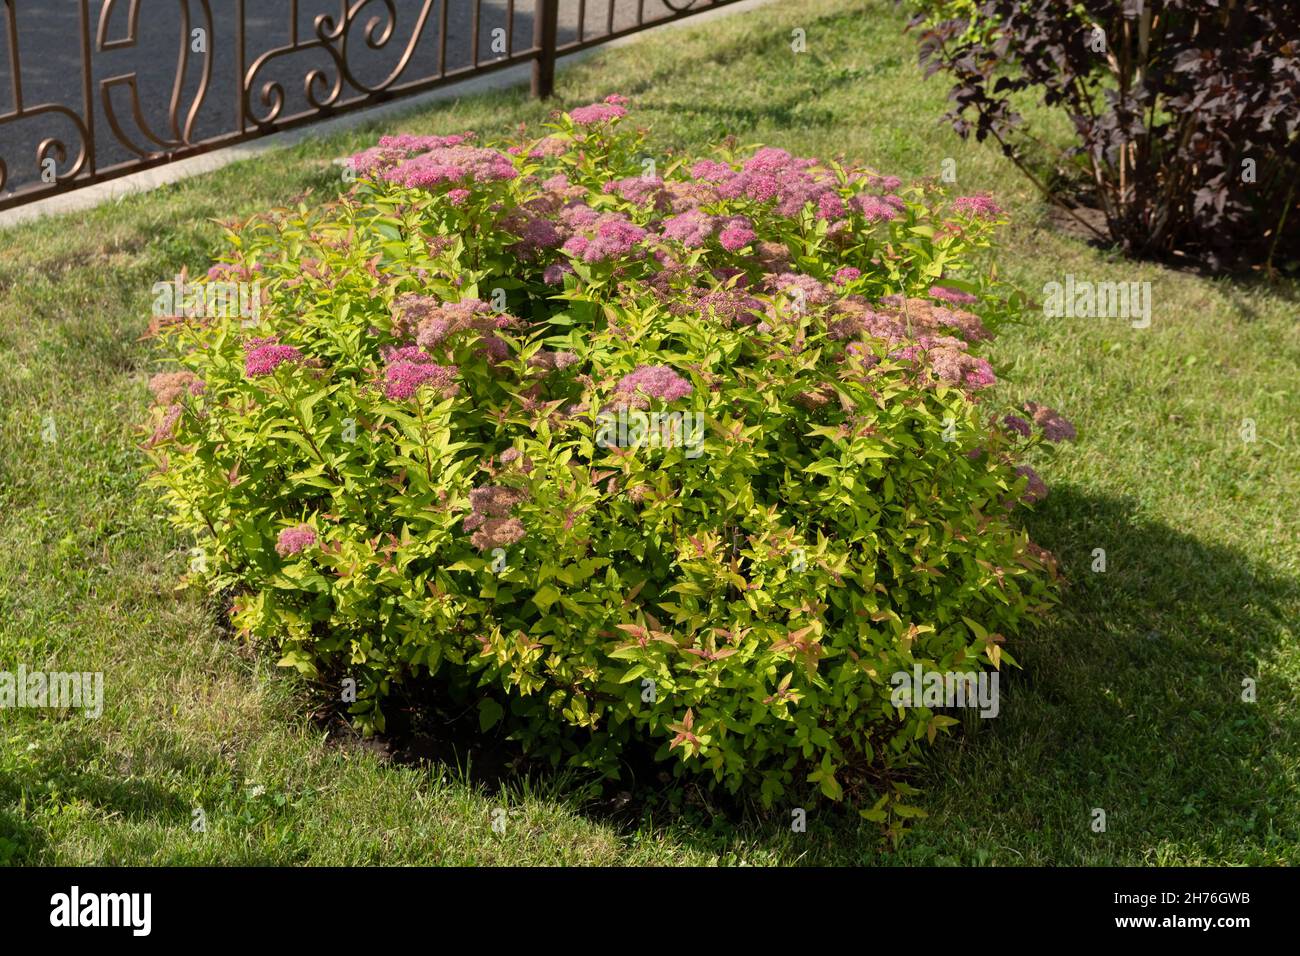 A spirea bush of the Japanese variety Goldflame blooms on a lawn next to a metal fence on a sunny summer day. Stock Photo